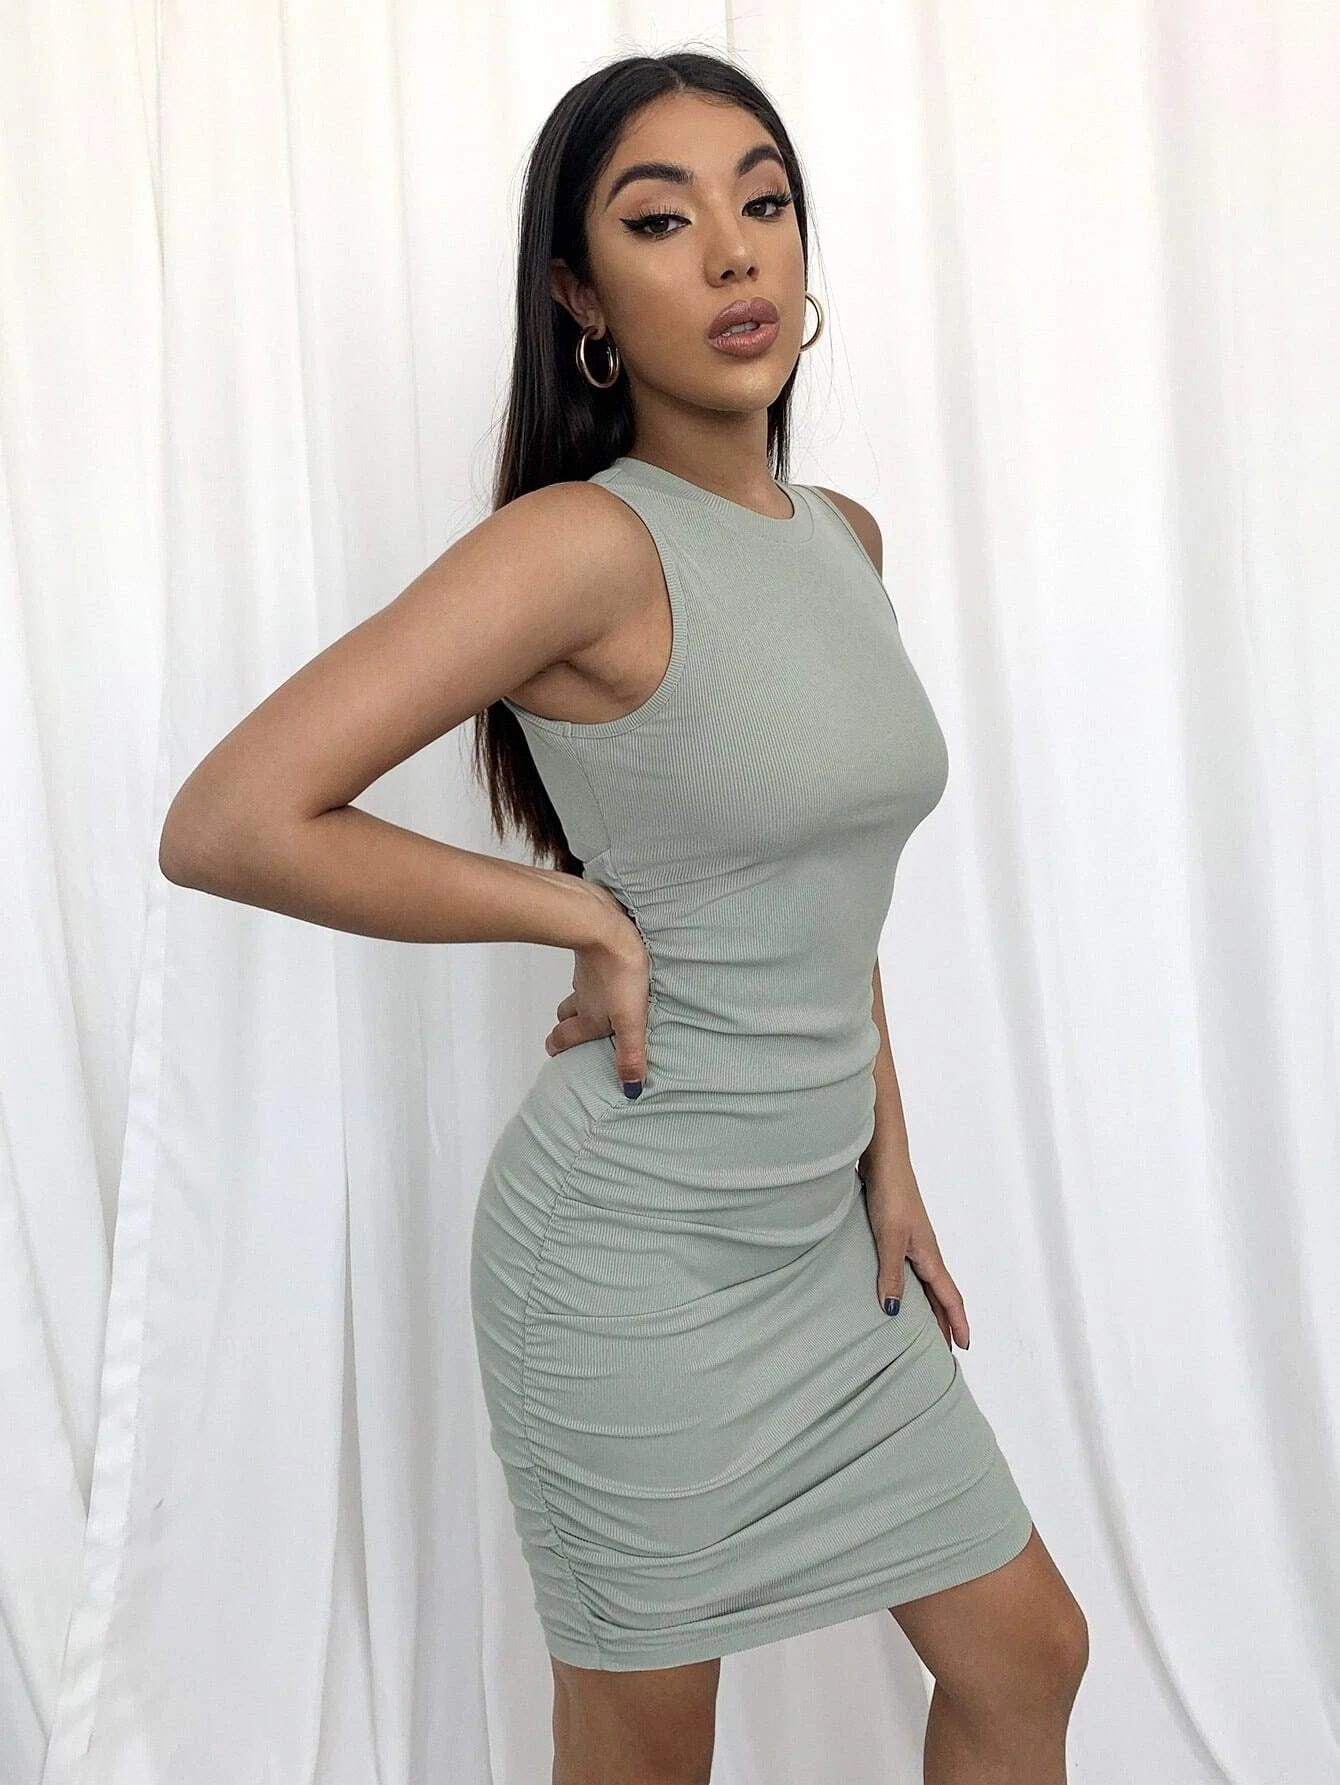 2022 European and American women's vest dress mint green slim sexy knitted skirt solid color pleated sleeveless dress